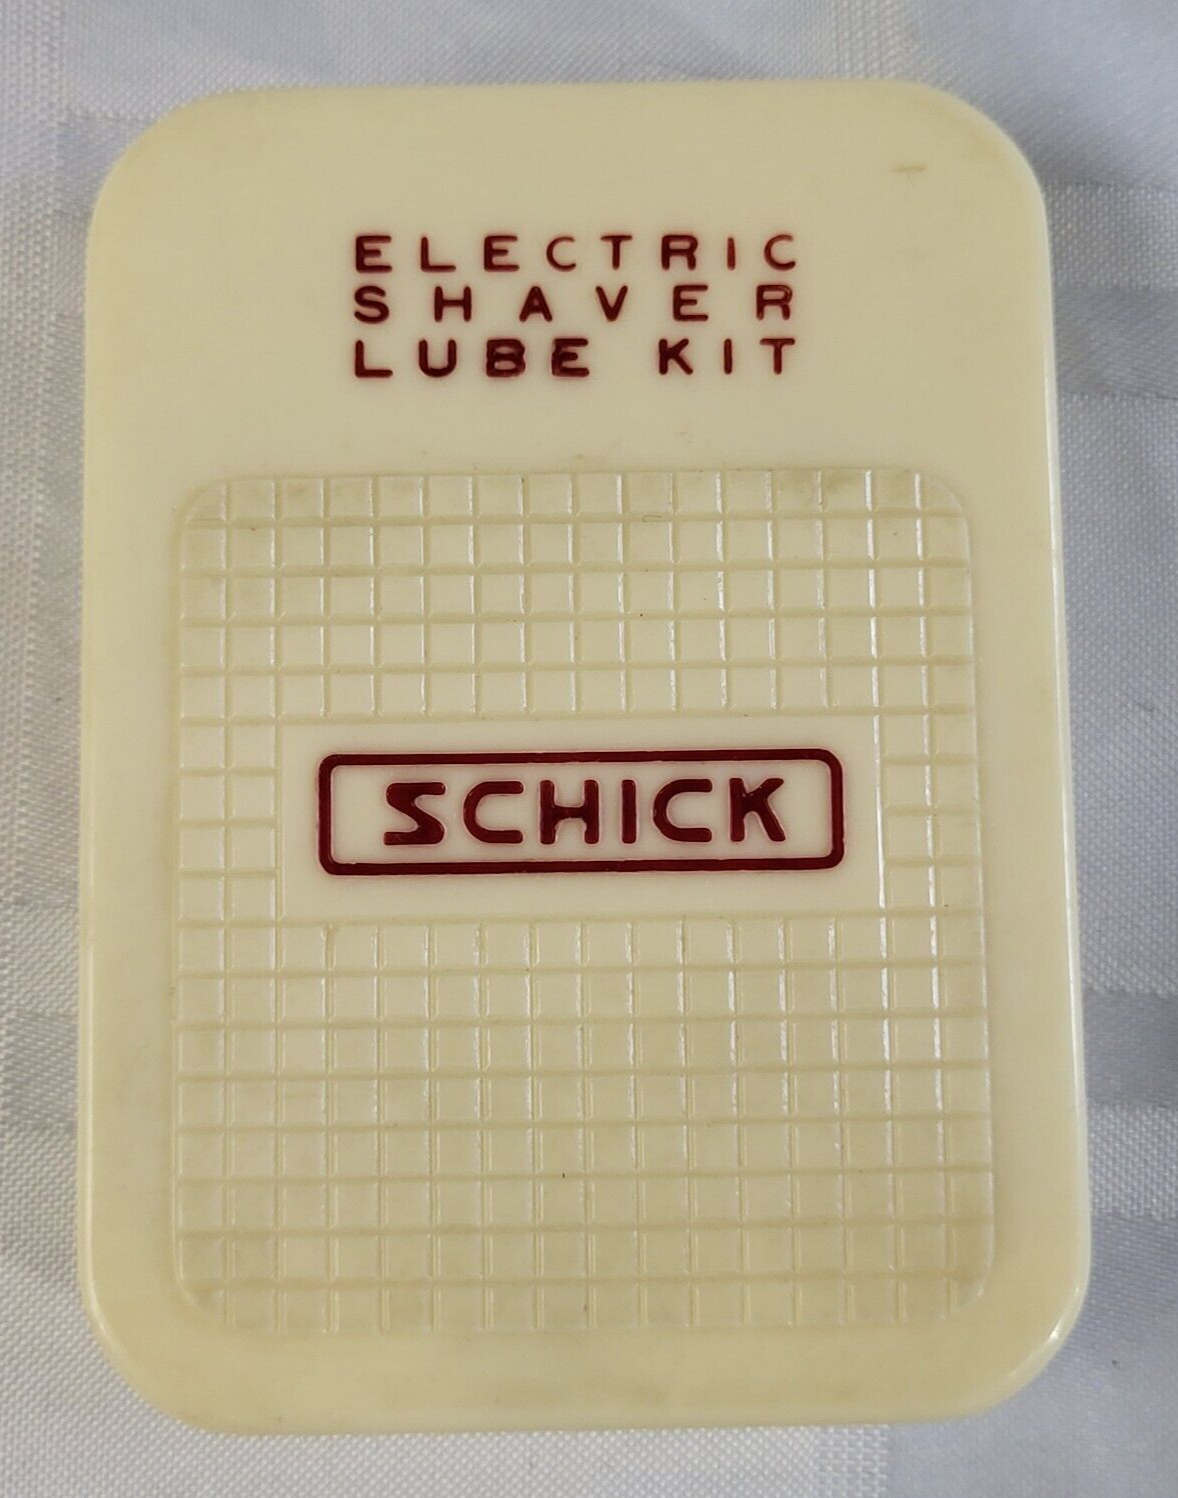 Primary image for SCHICK ELECTRIC SHAVER LUBE KIT VINTAGE SHAVING LIDDED BOX WITH MIXED ITEMS